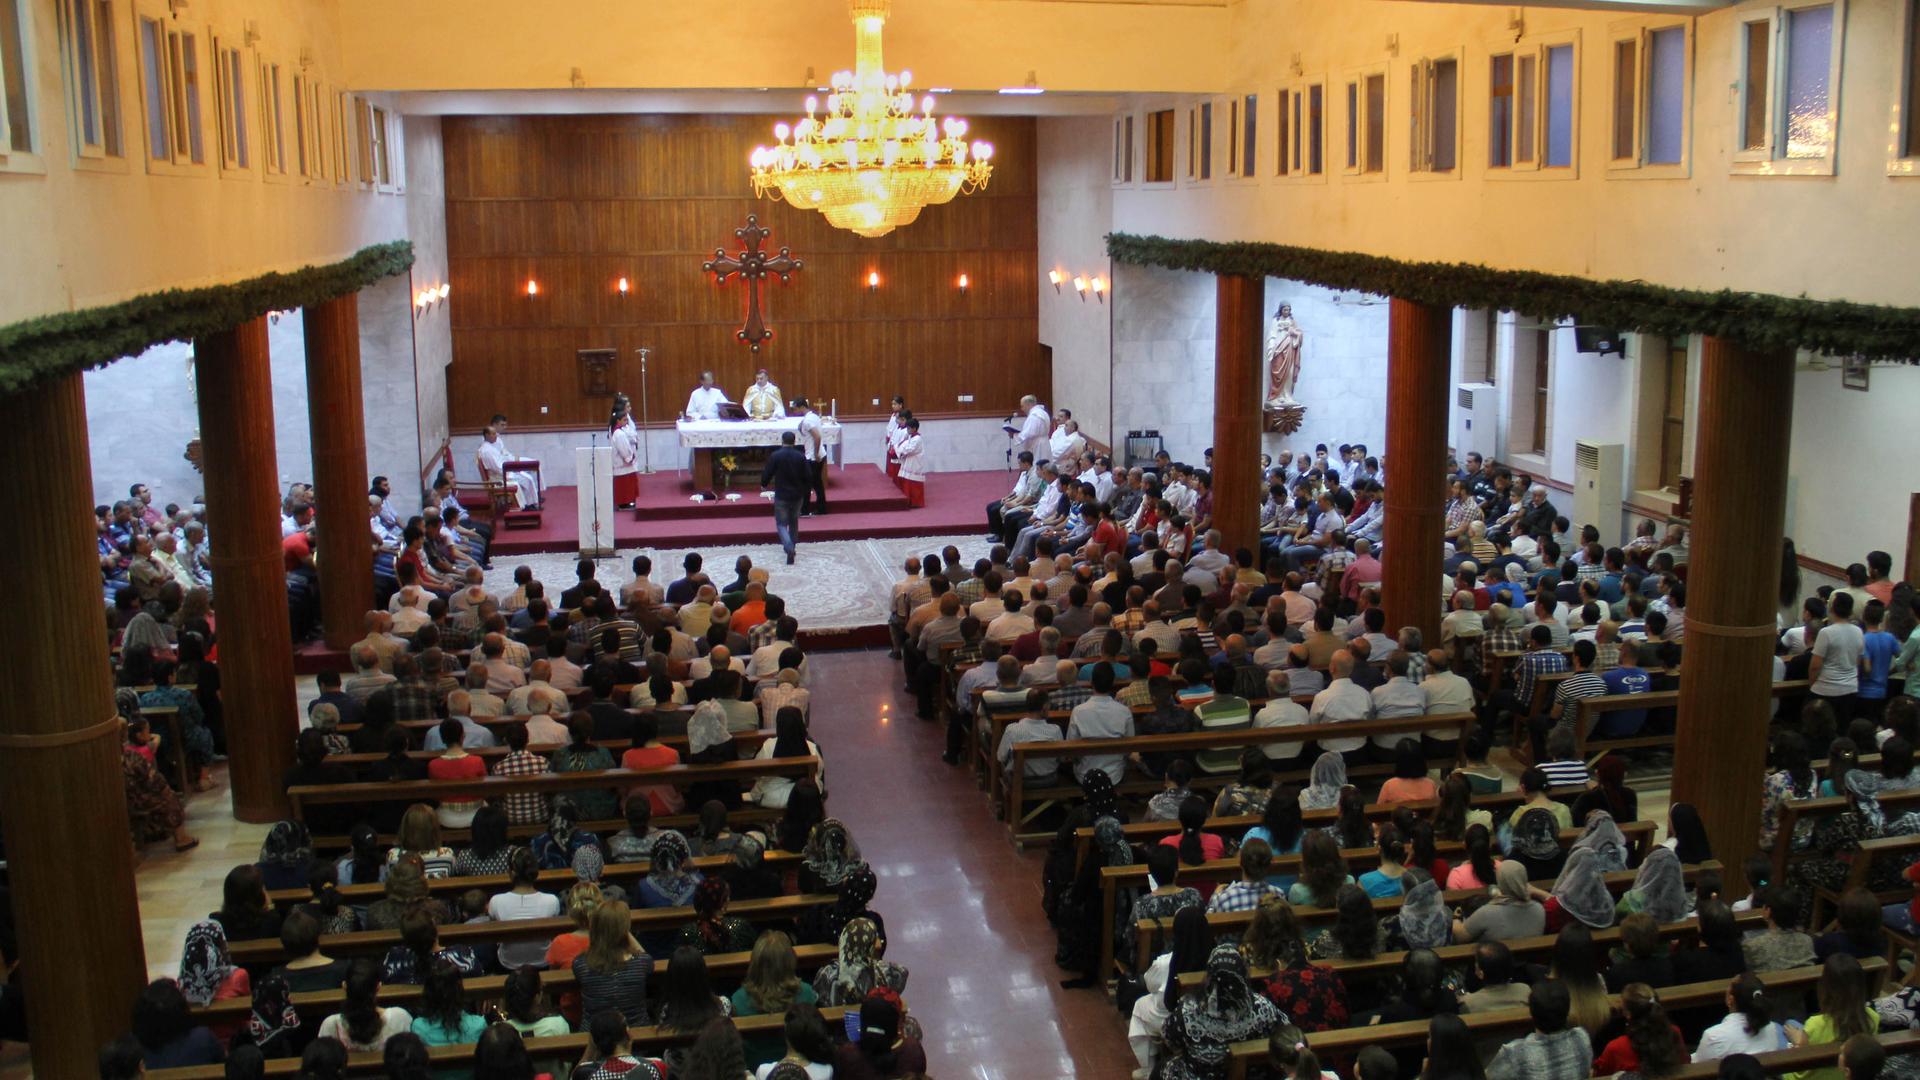 Christians, most displaced from their homes, pray in a church in Erbil in northern Iraq.